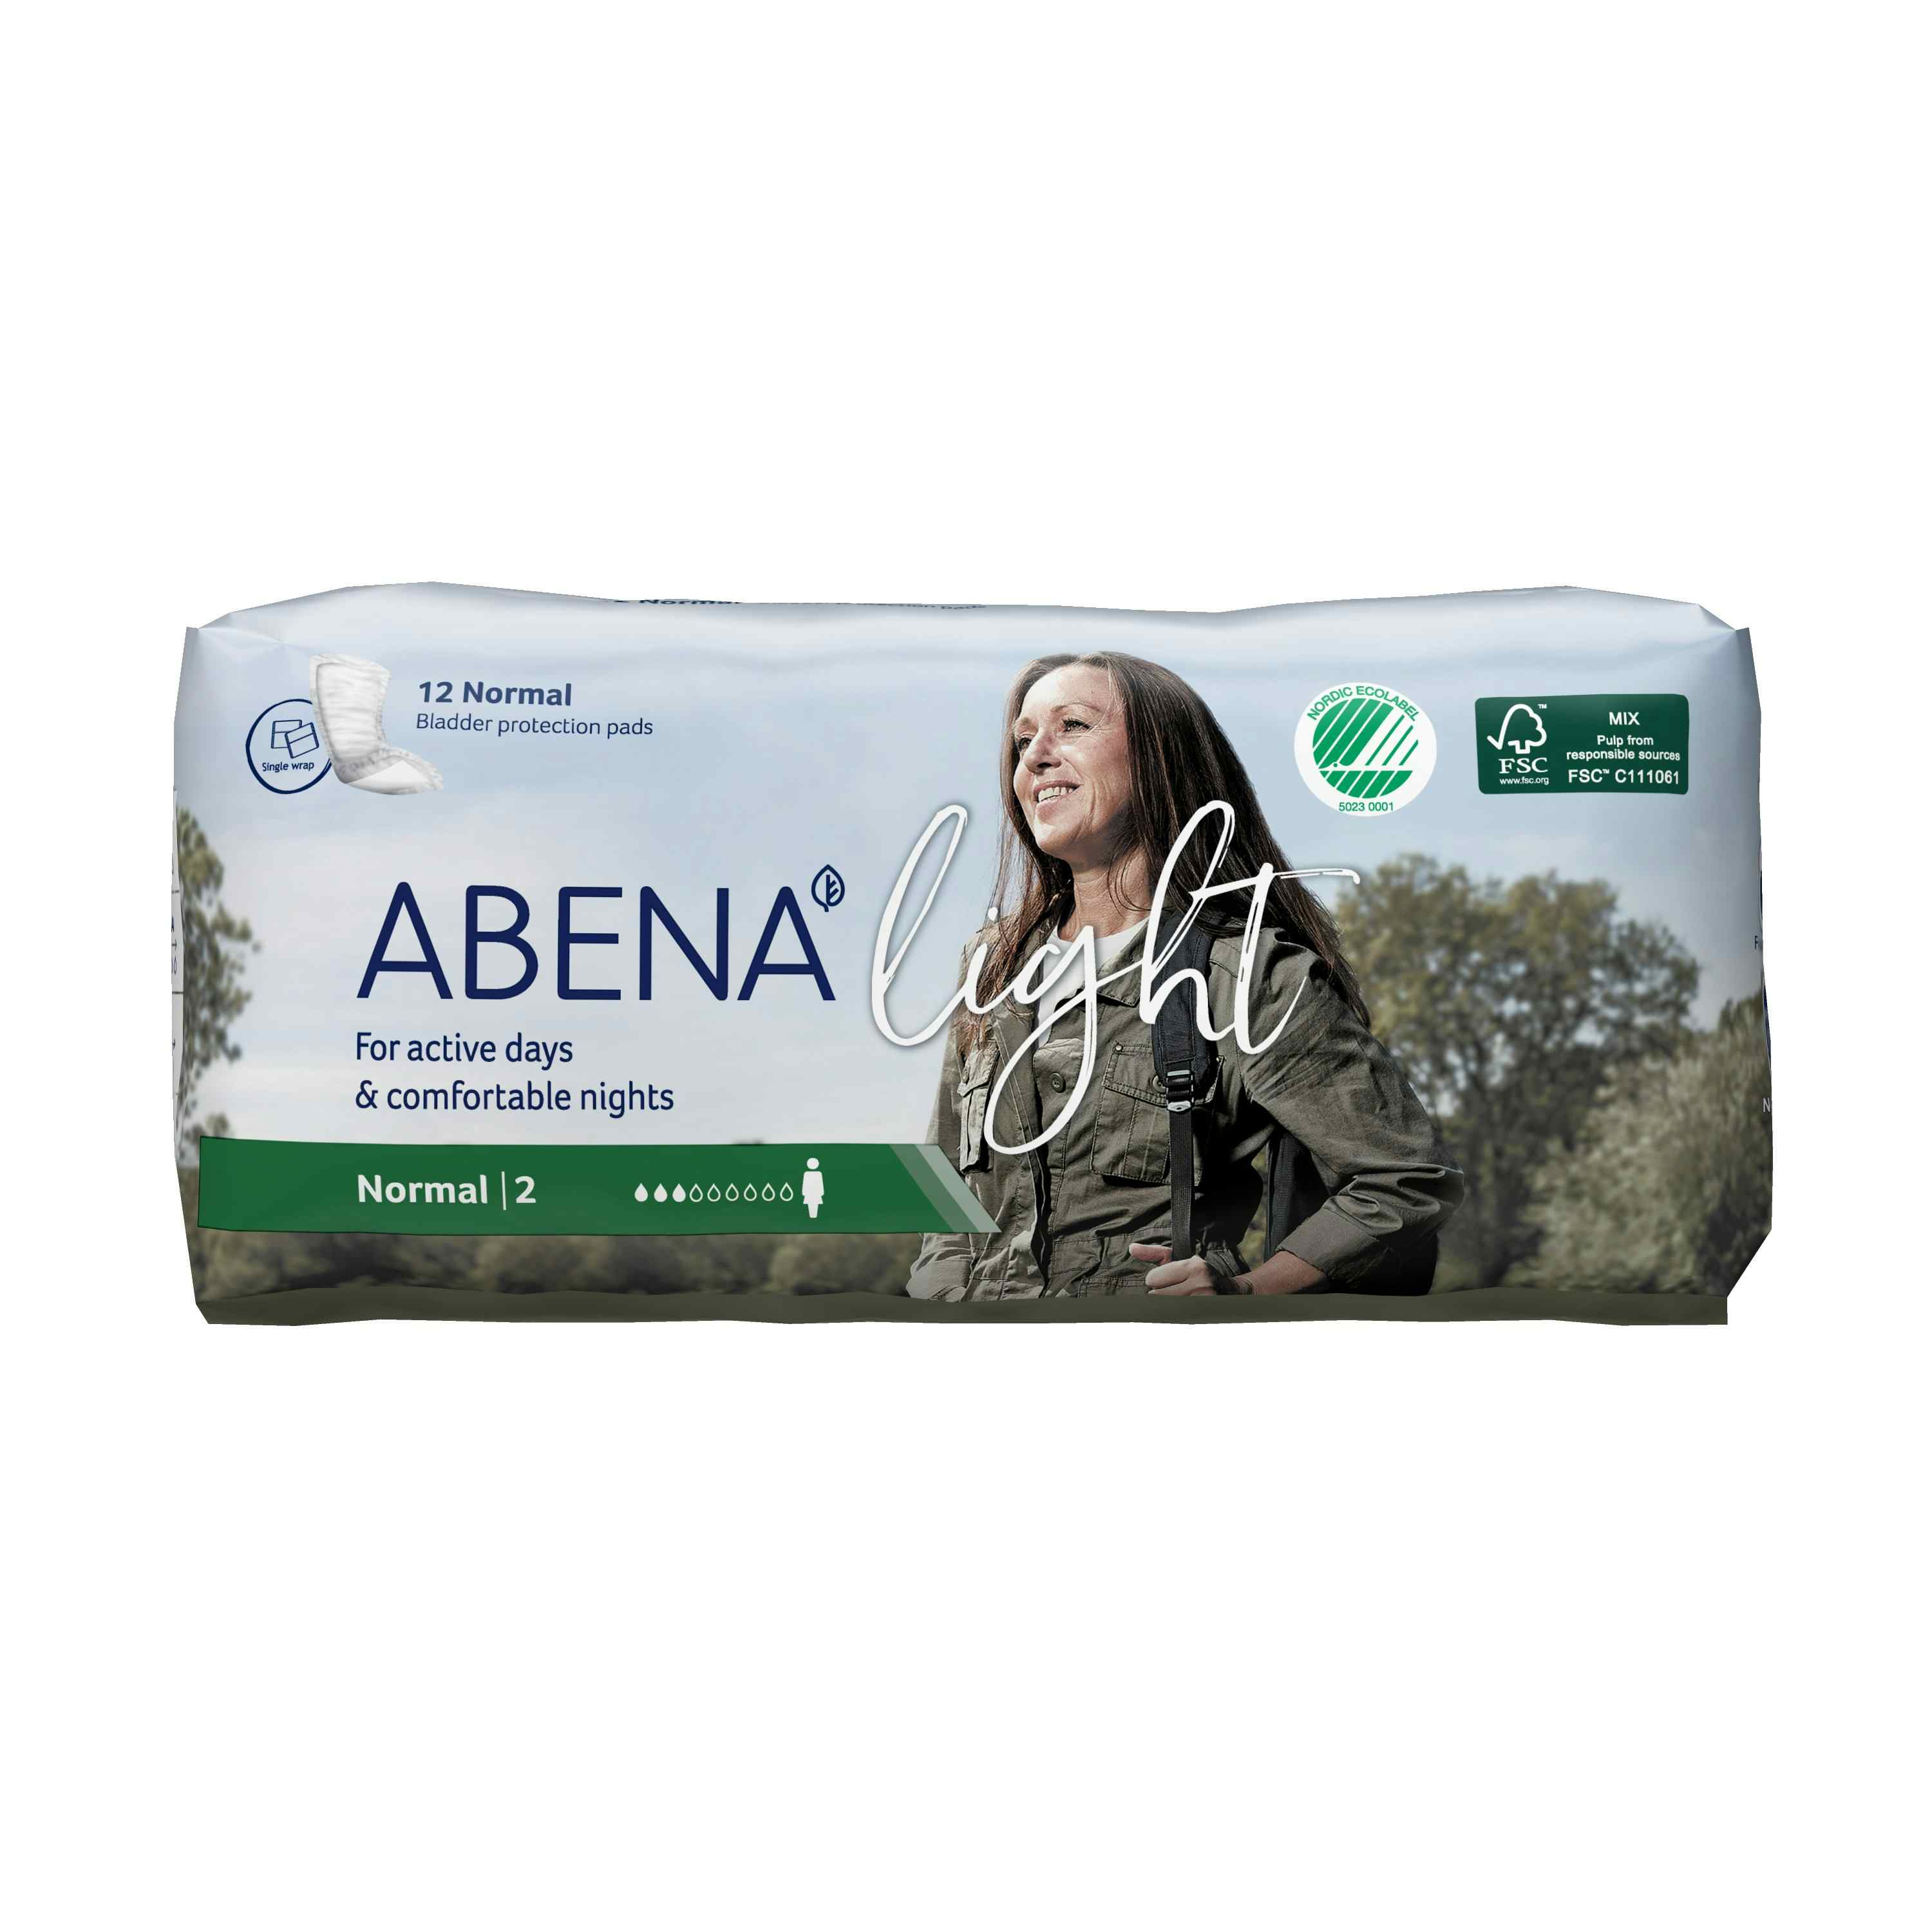 Abena Light Normal Disposable Unisex Adult Bladder Control Pad, Light Absorbency, 1000017157, One Size Fits Most -  Bag of 12